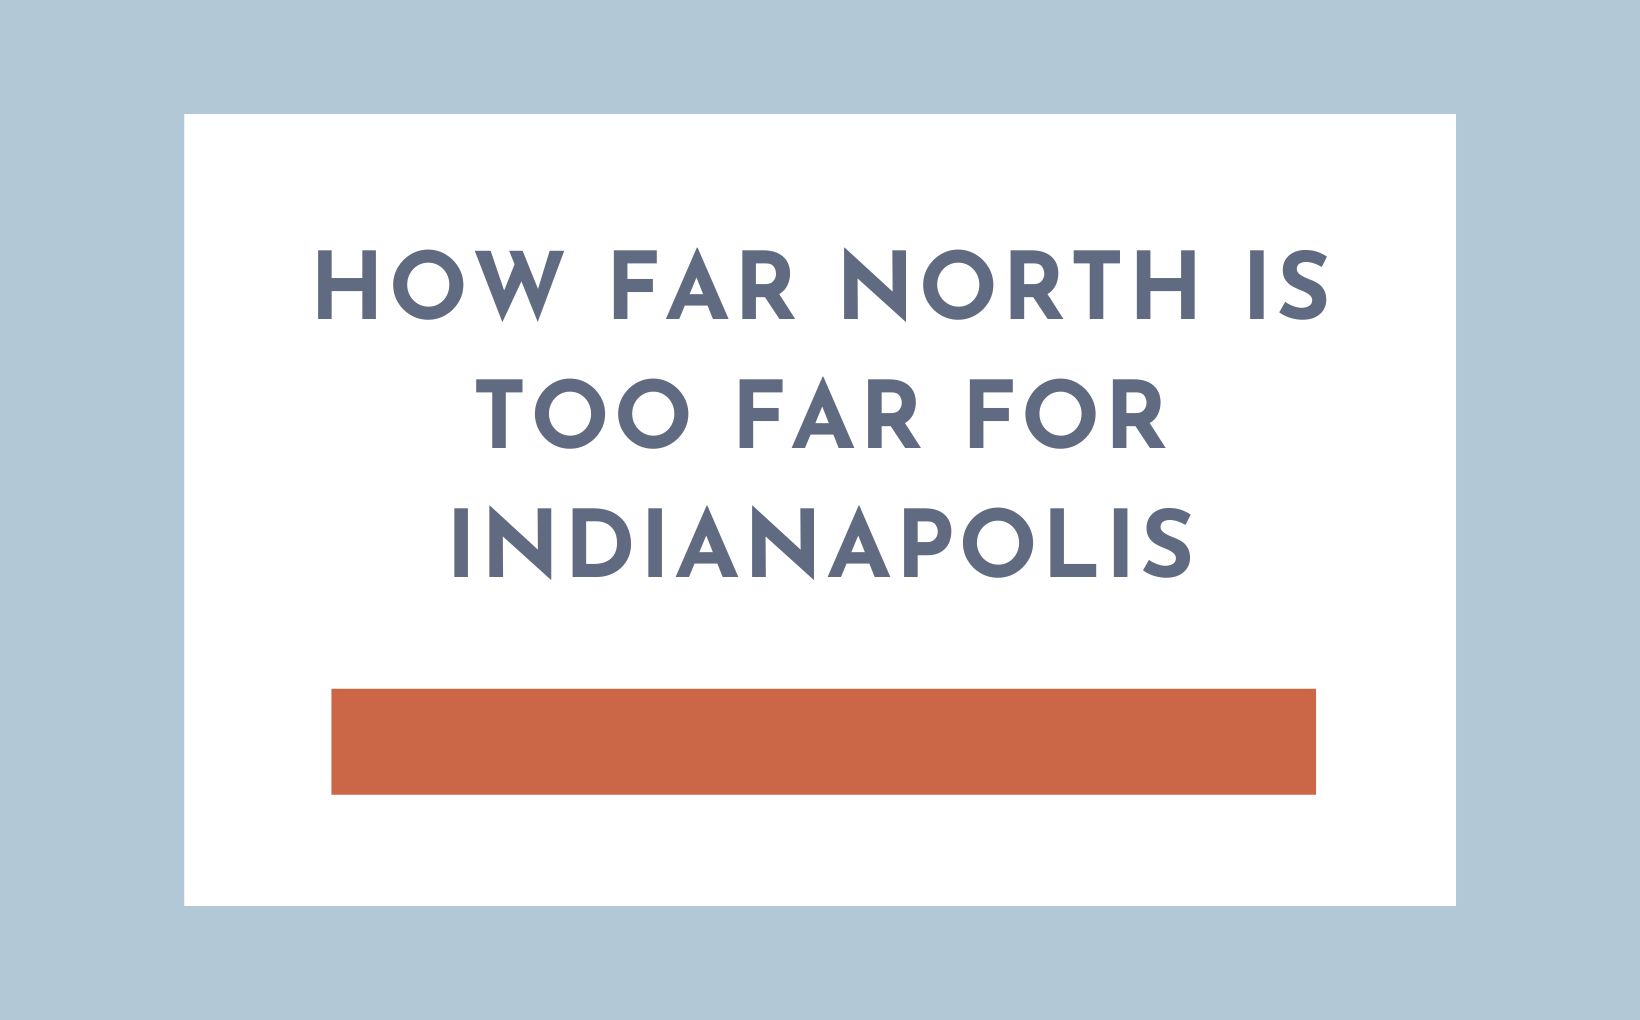 How far north is too far for Indianapolis feature image.